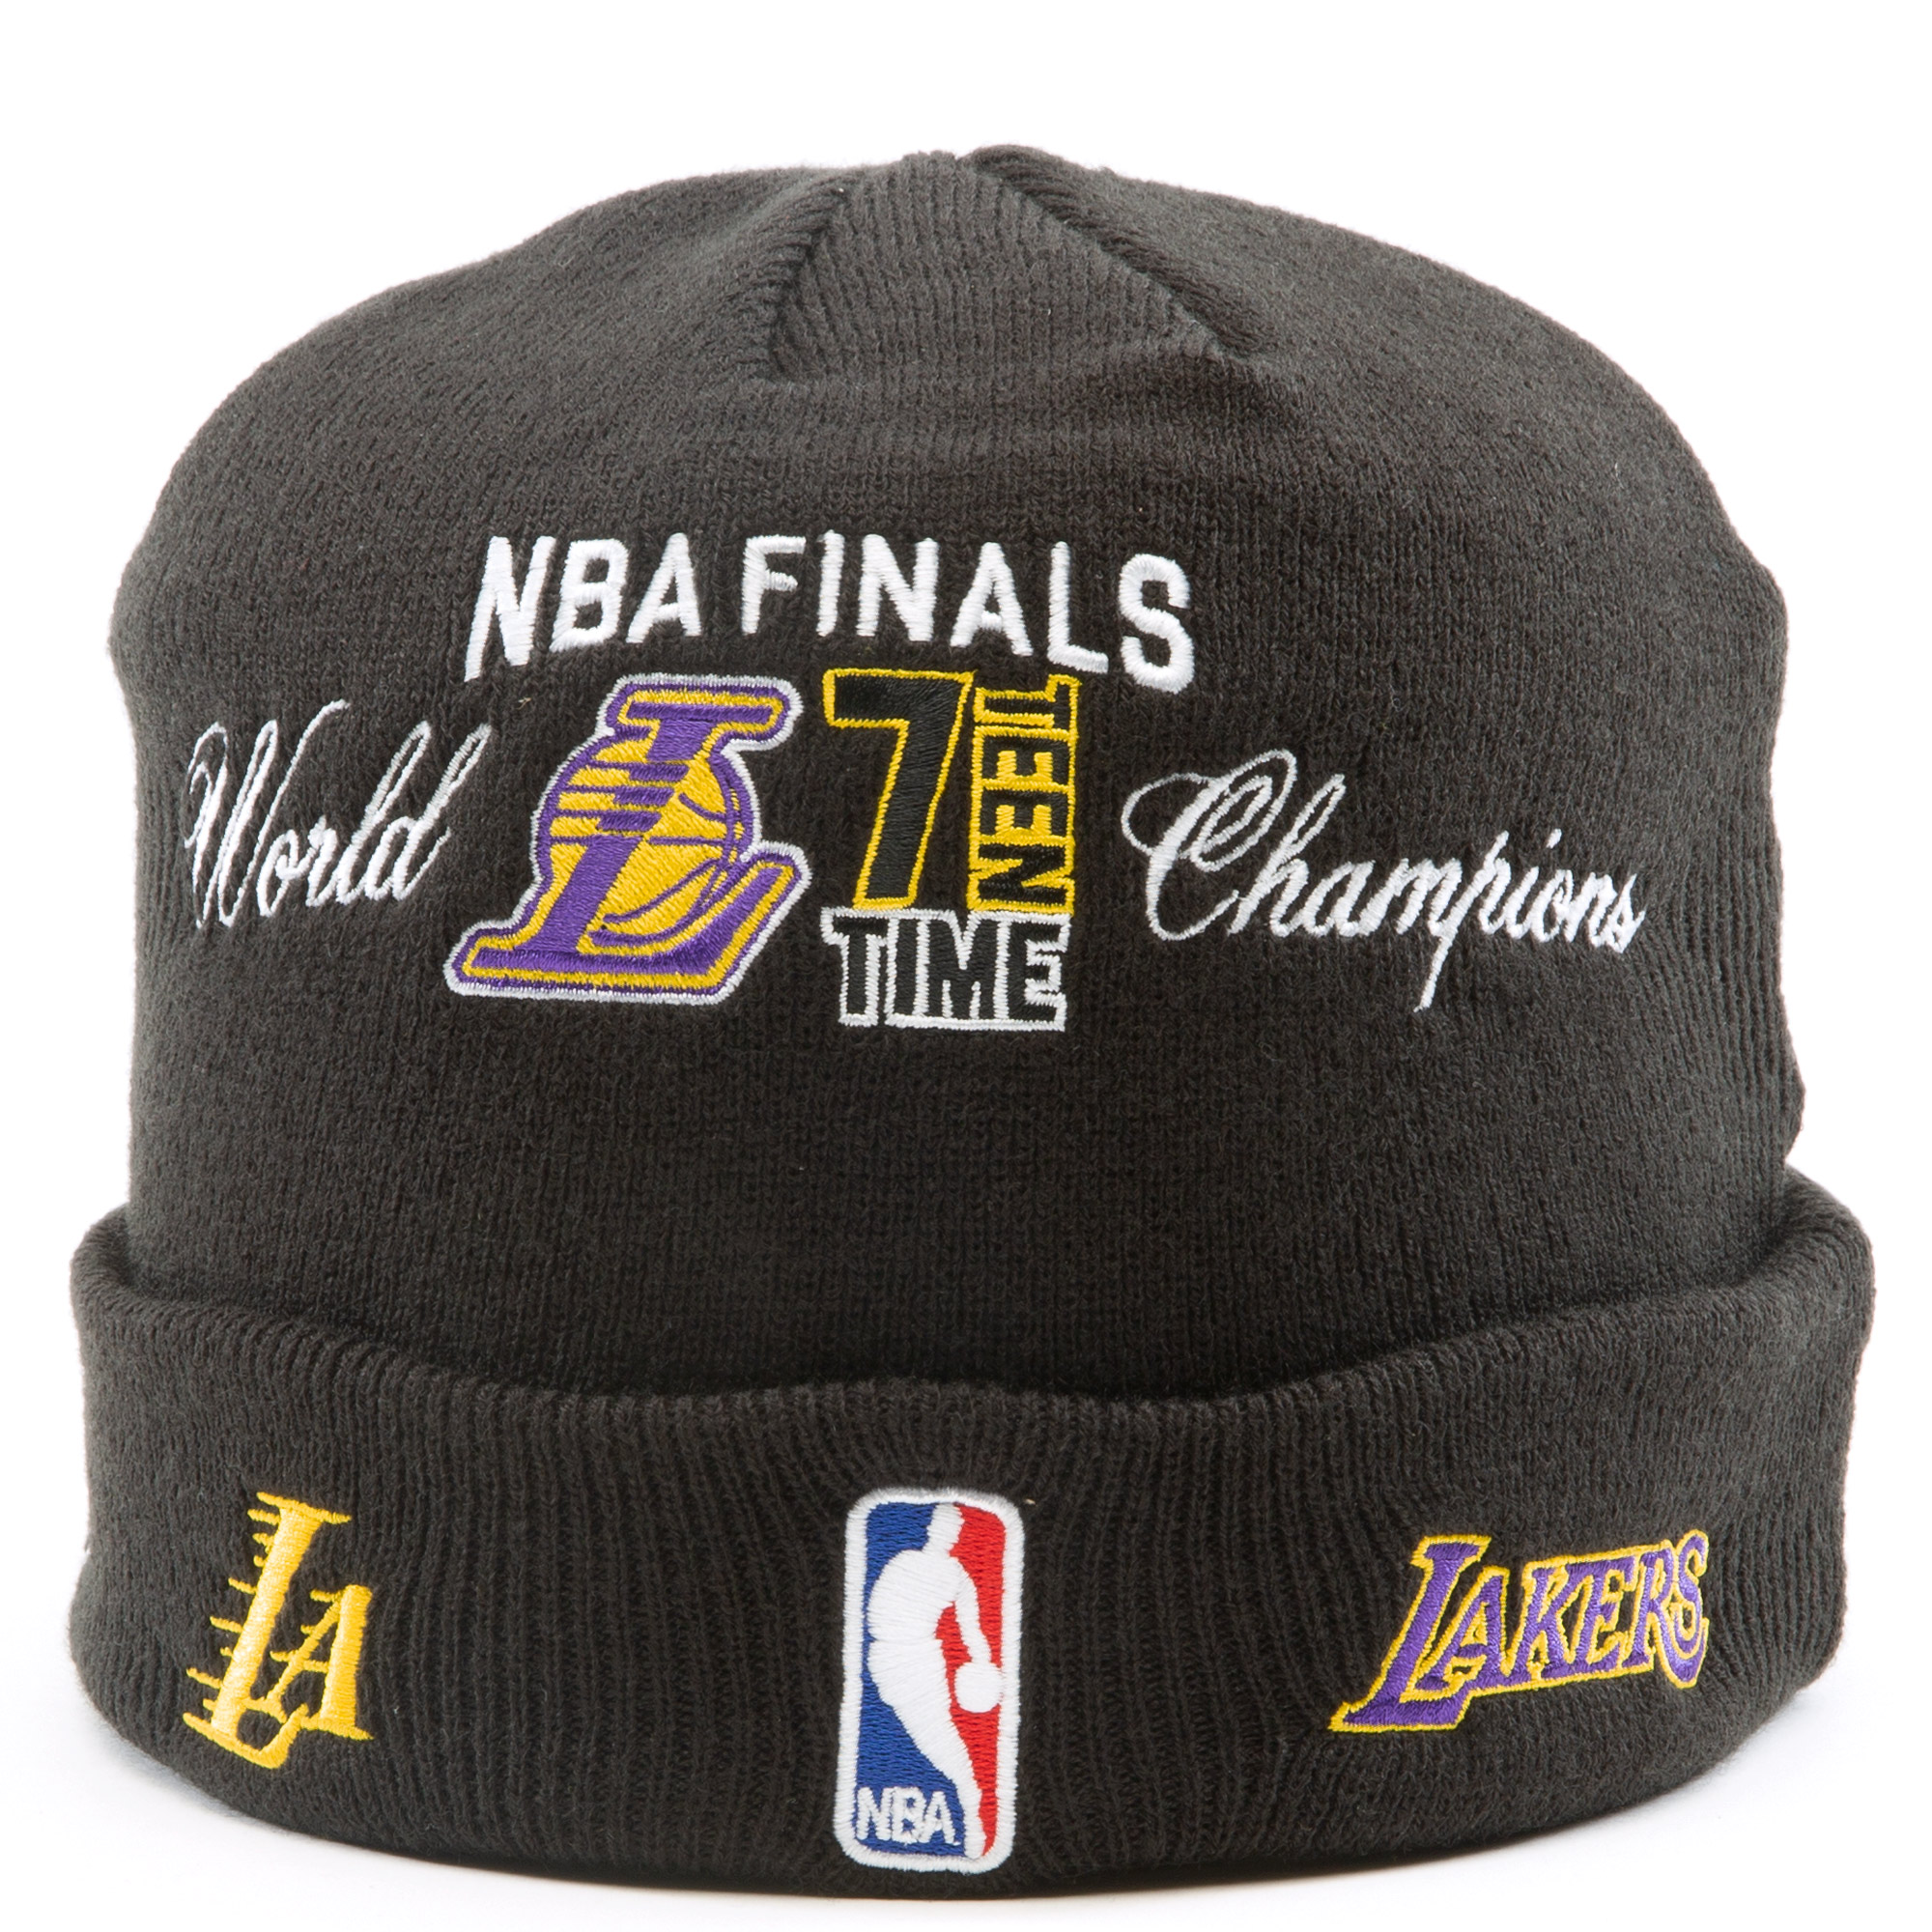 LOS ANGELES LAKERS KNIT BEANIE 60185294